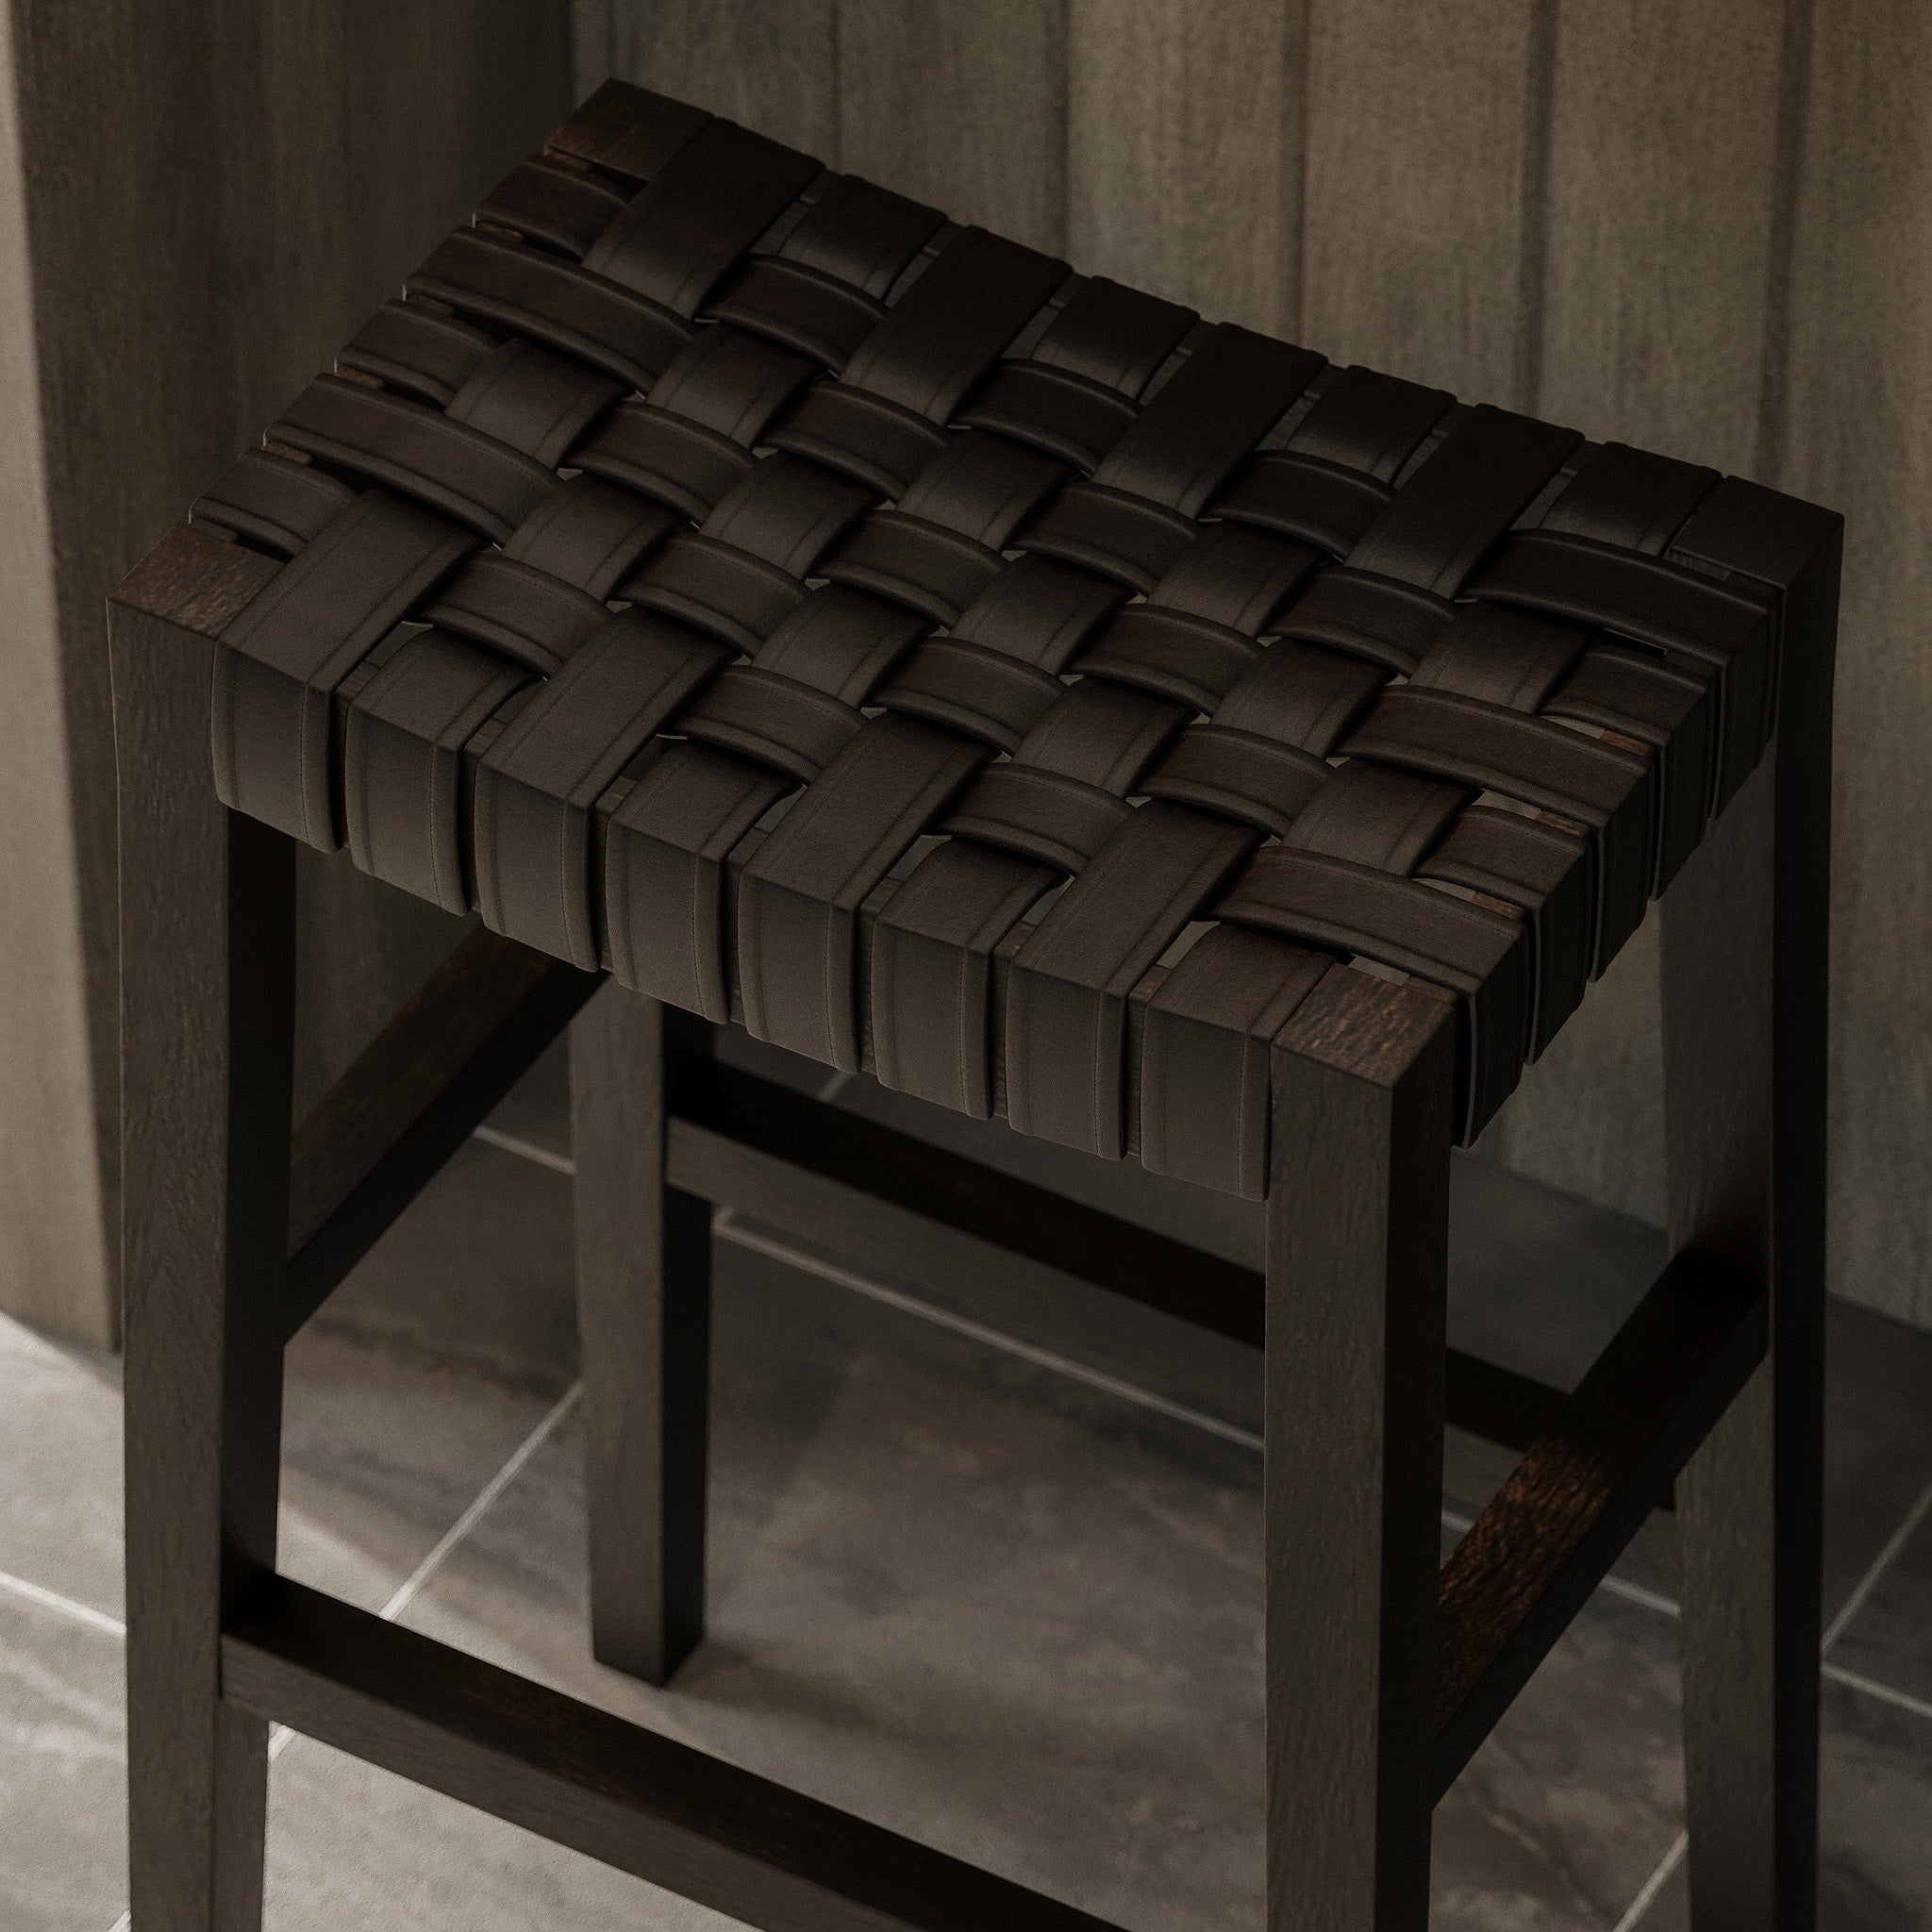 Emerson Bar Stool in Weathered Brown Wood Finish with Marksman Saddle Vegan Leather in Stools by Maven Lane